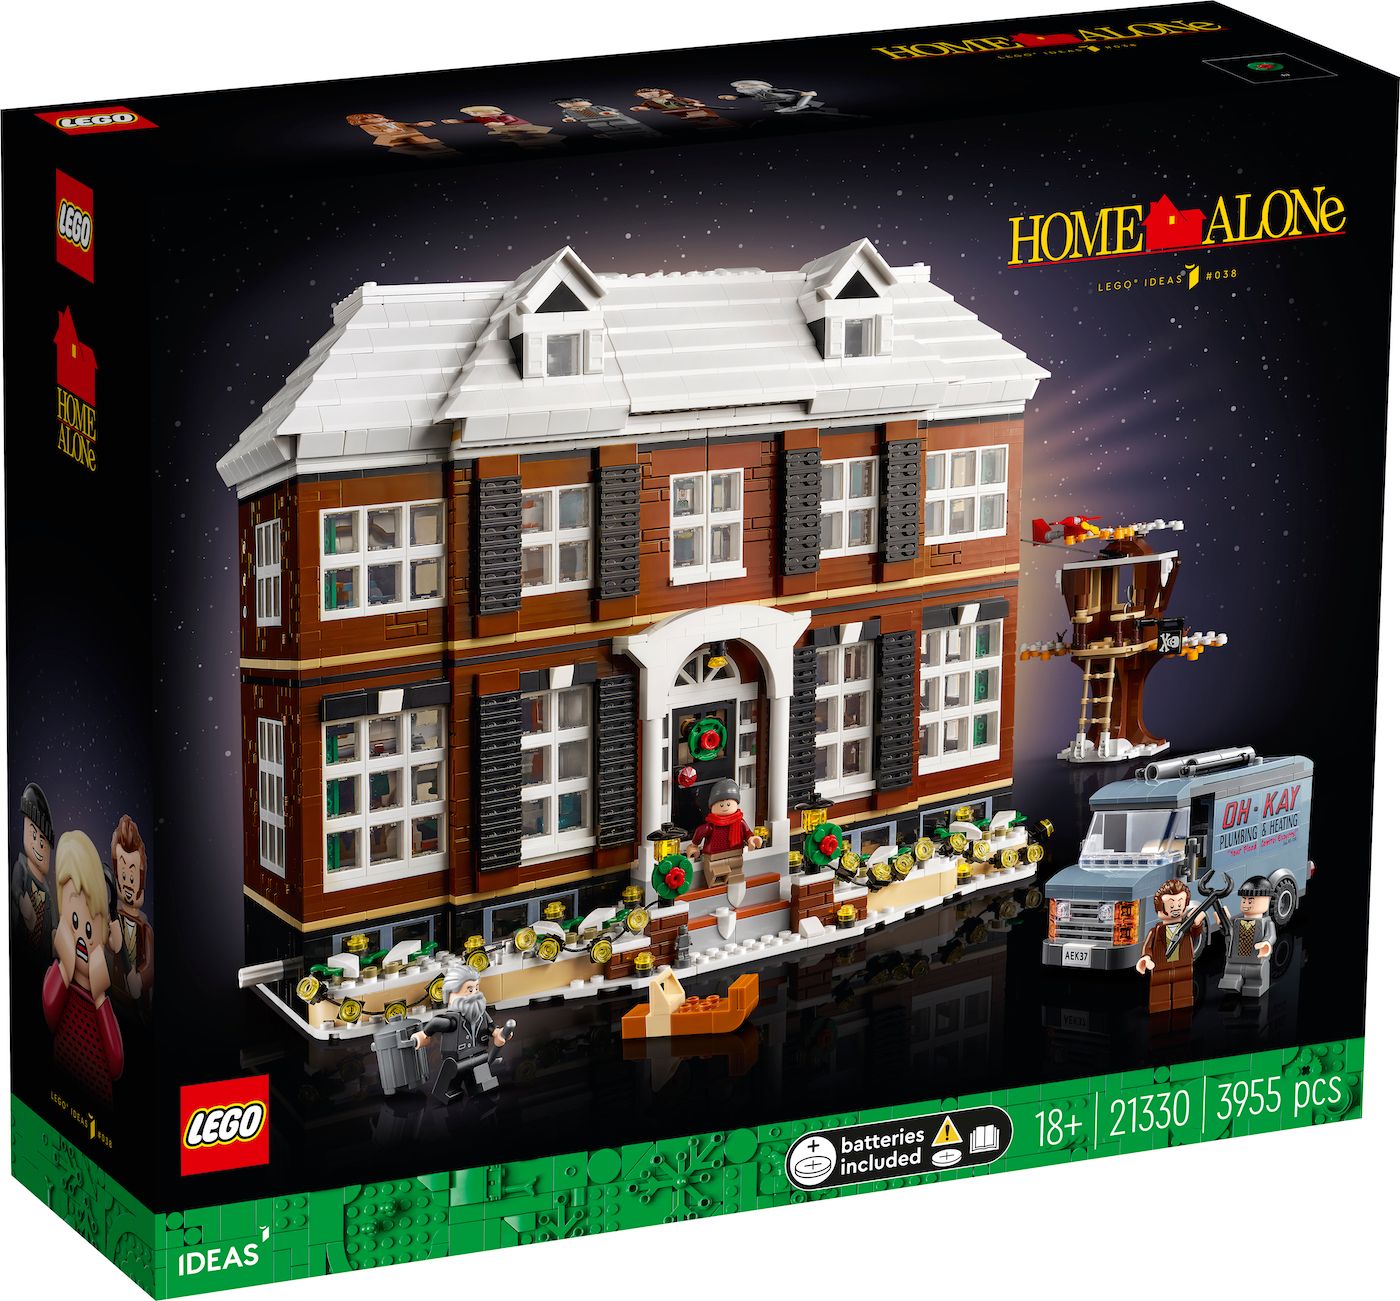 home-alone-lego-box-front